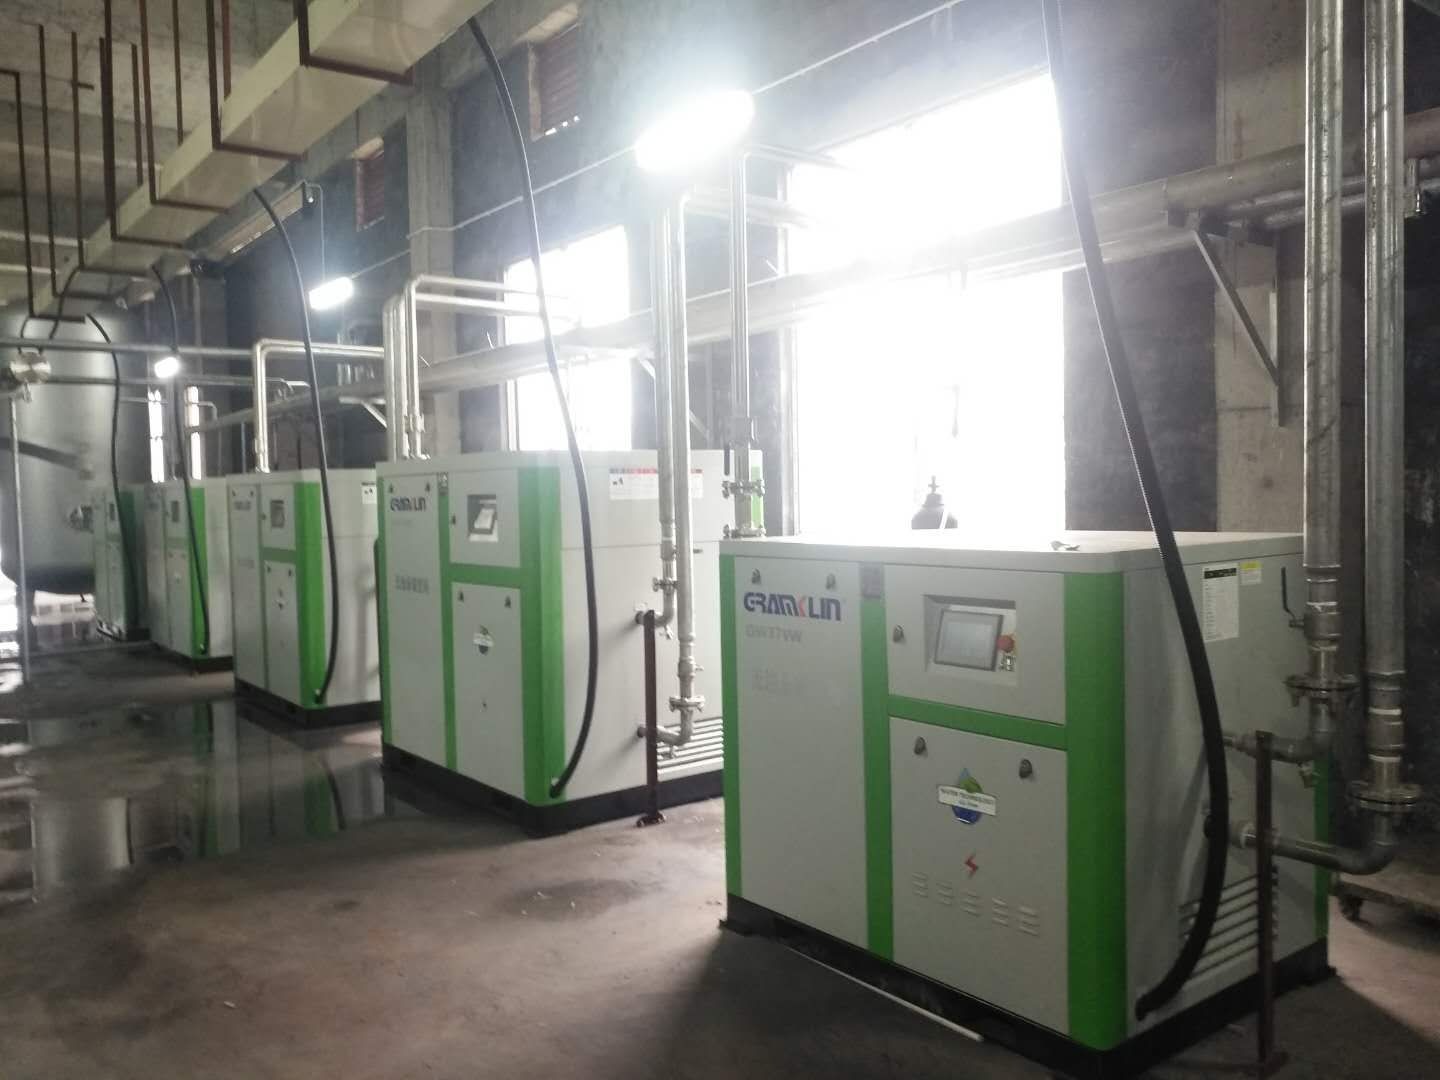 Intelligent Variable Frequency Water Lubricating Oil-Free Screw Compressor